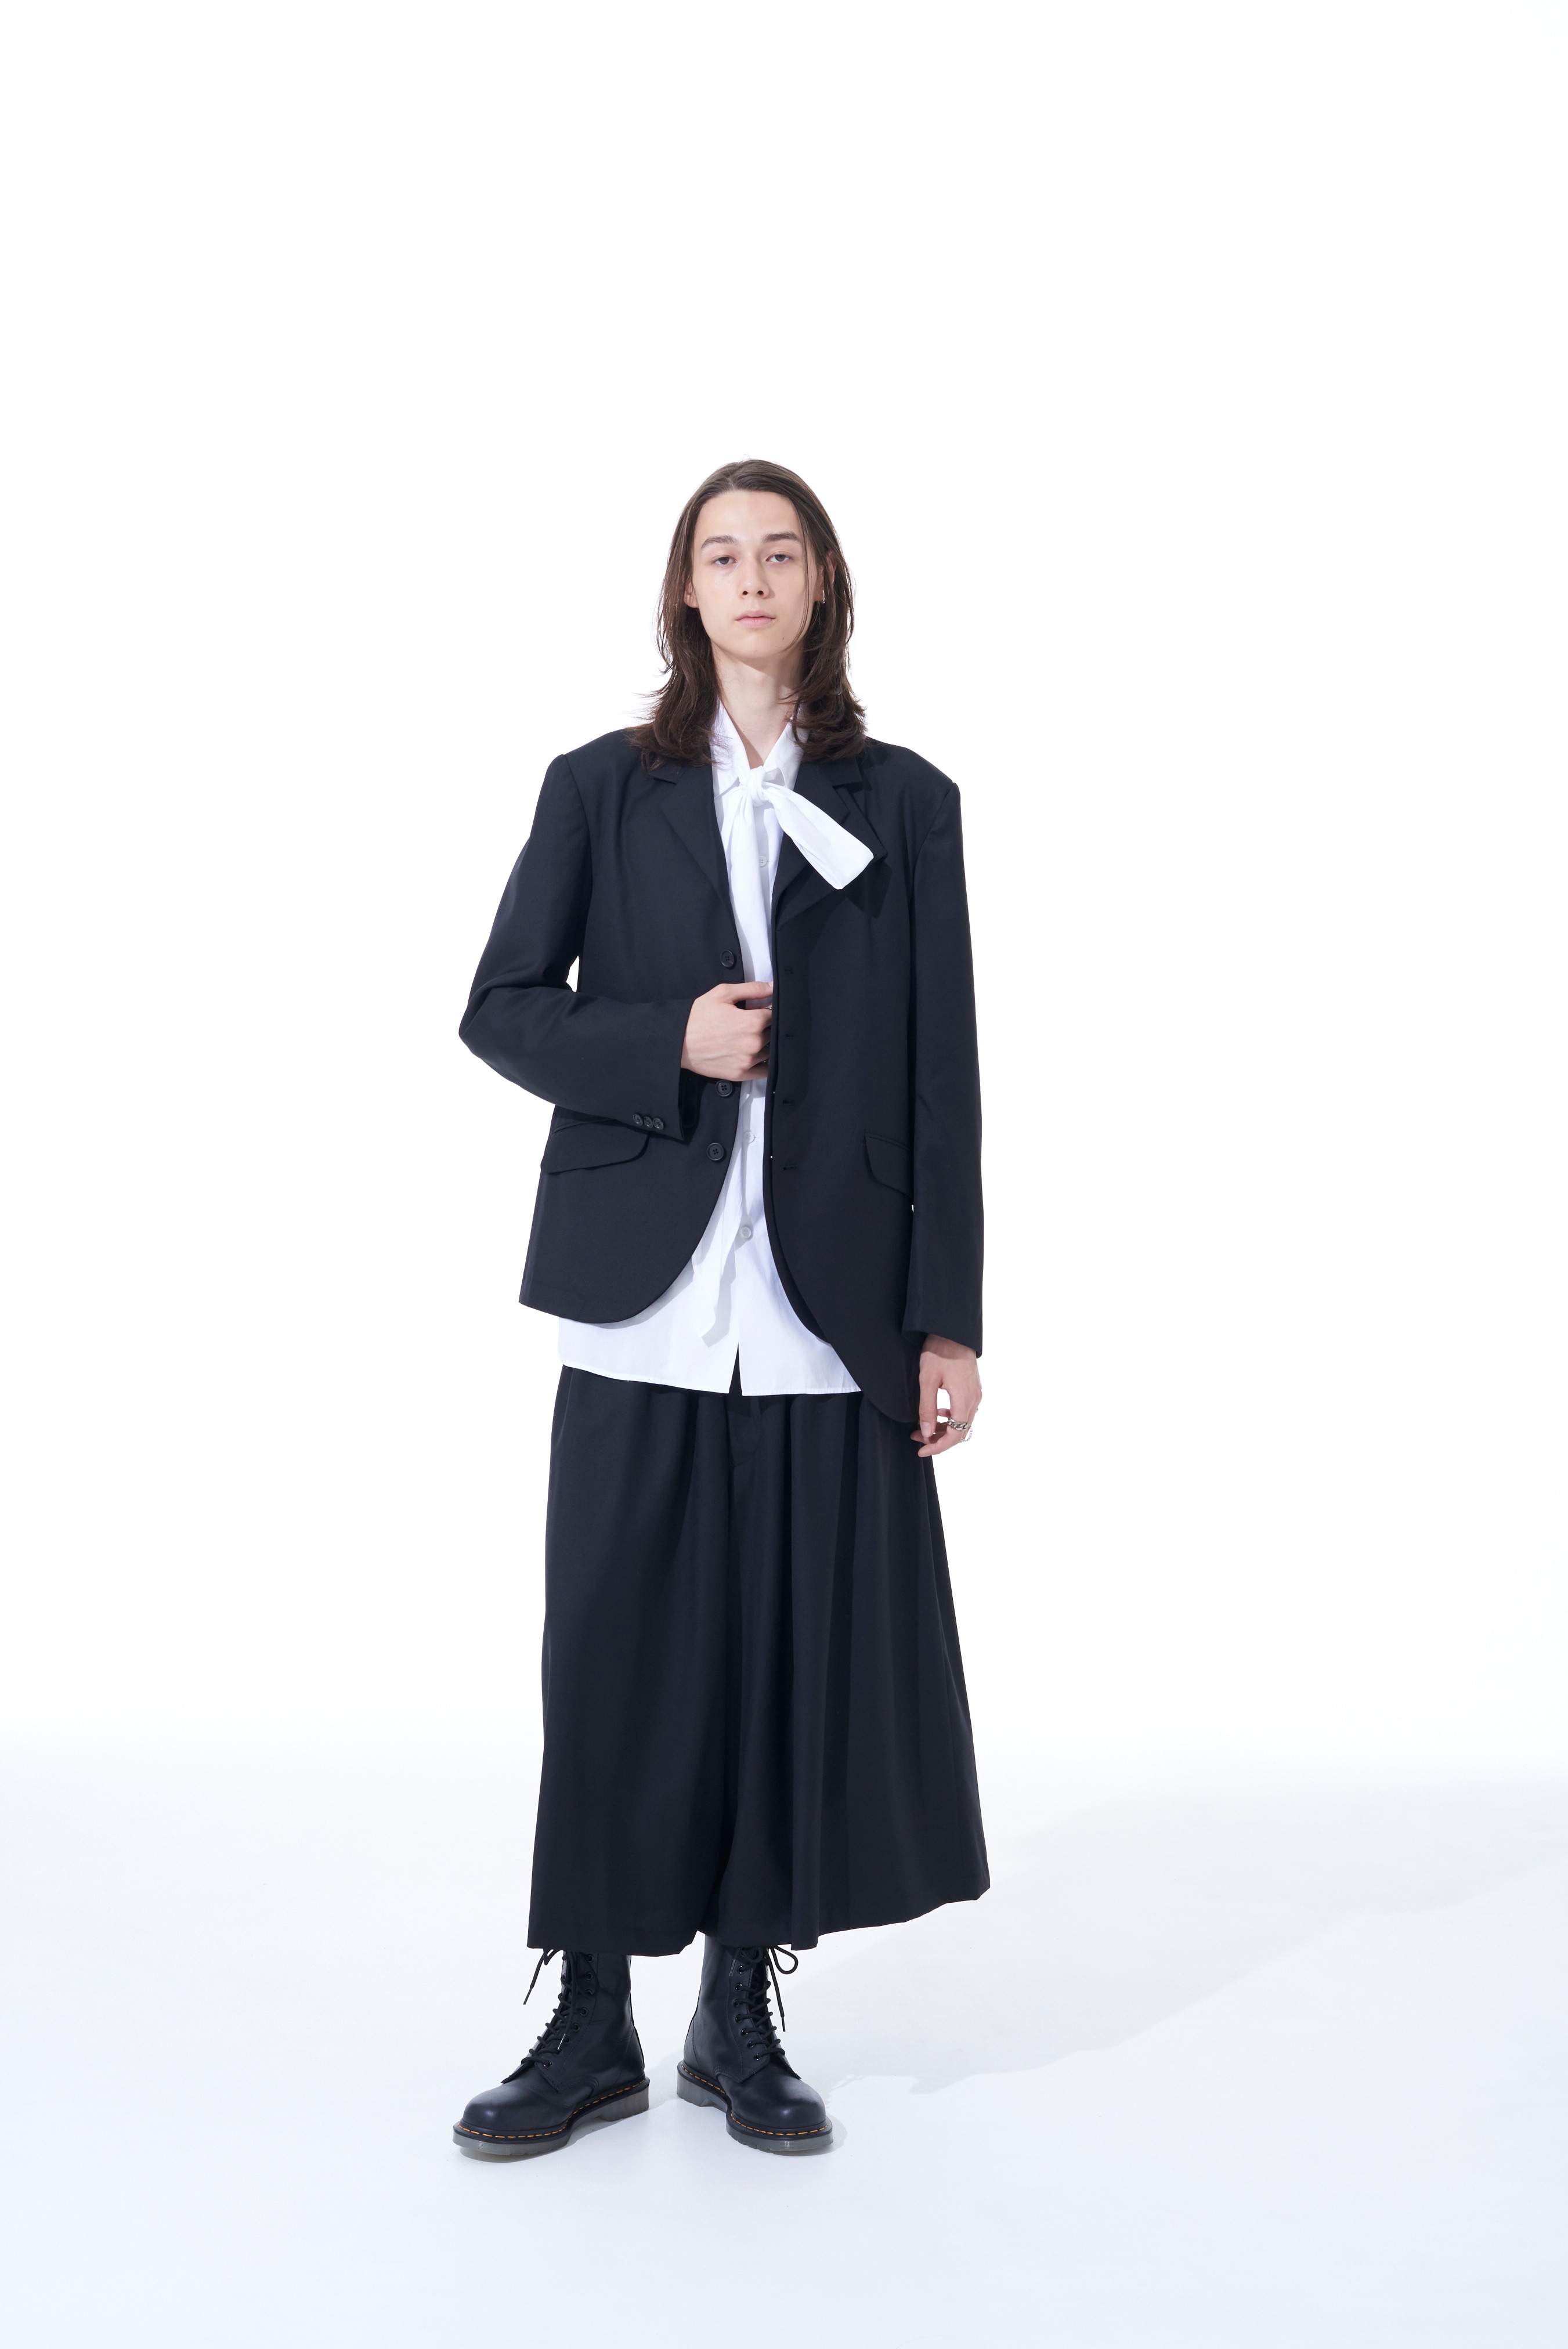 T/W GABARDINE JACKET WITH DOUBLE-TAILORED LEFT FRONT(M Black): S